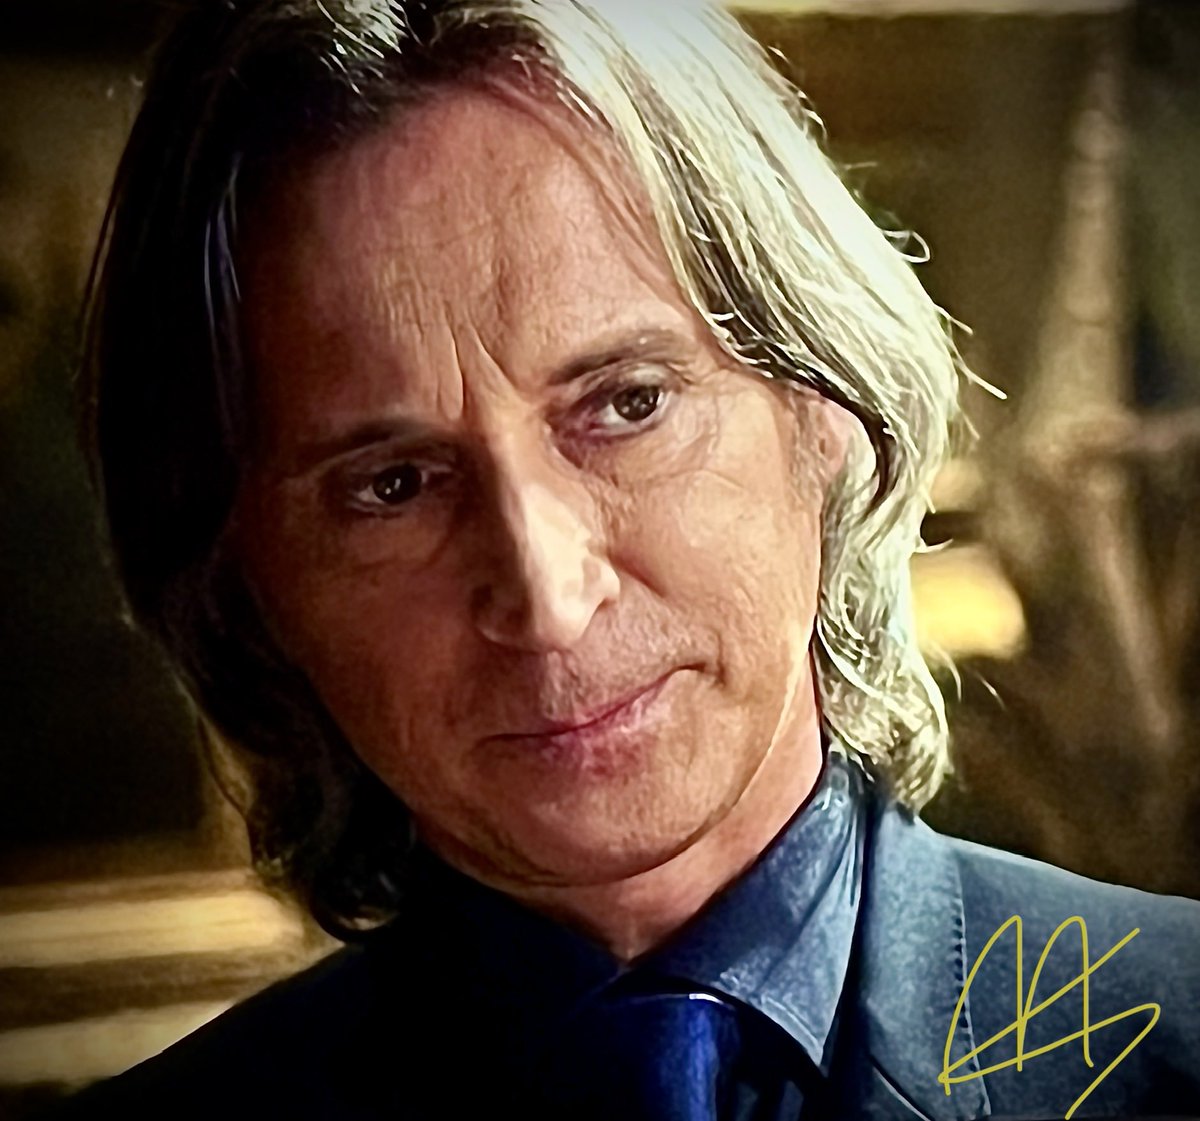 Some floof to golden up your night (or afternoon)🤗😊🙃 #RobertCarlyle #OUAT #dearies #alldearies